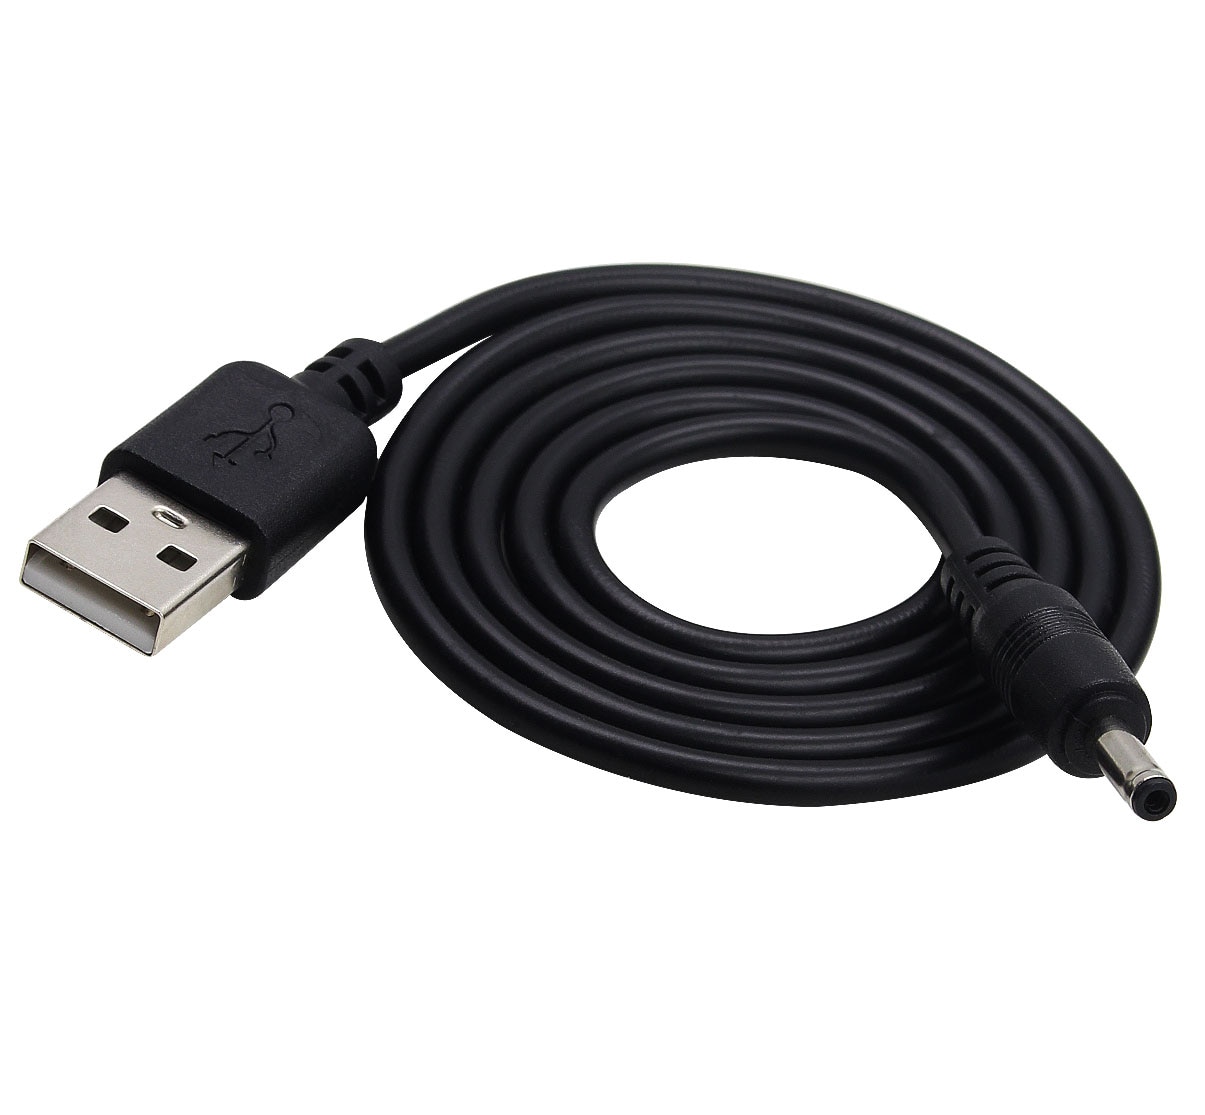 USB Charger Power Cable Cord Voor Remington HC5356 Pro Power Tondeuse